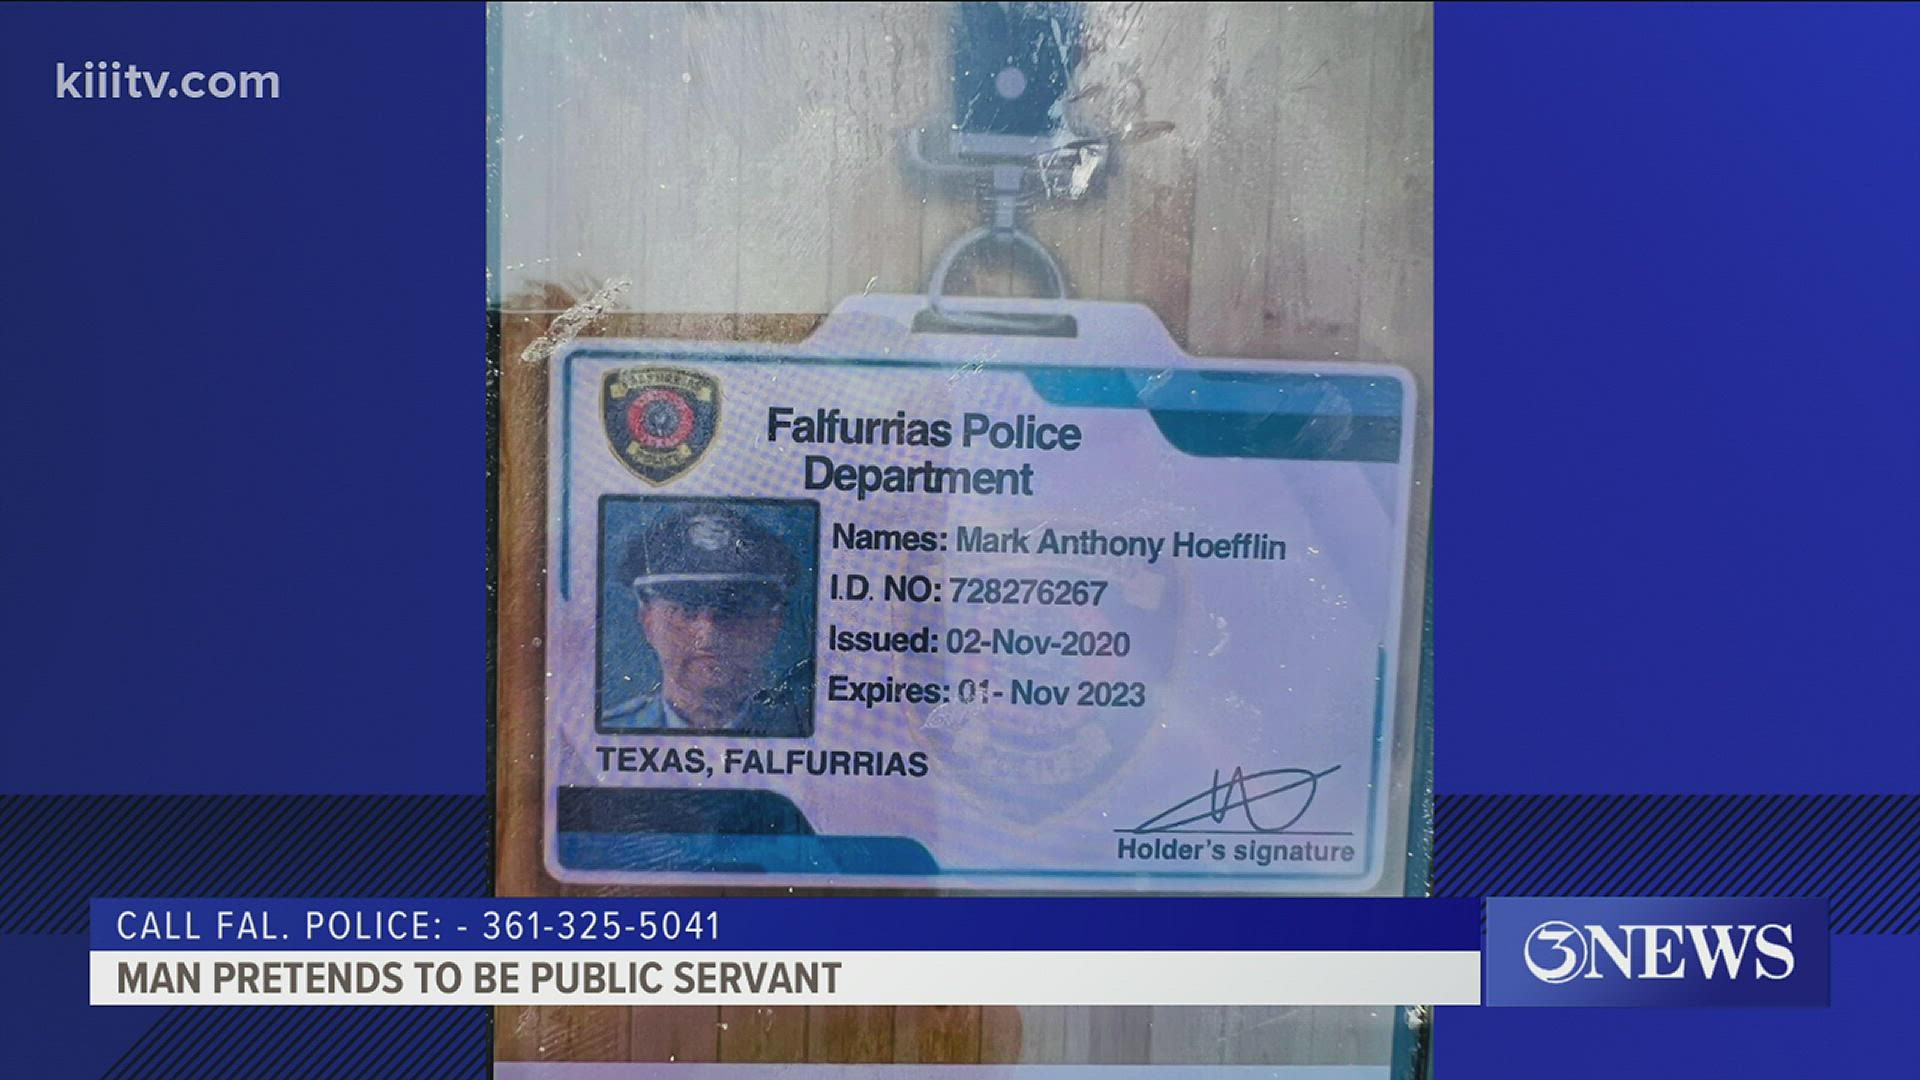 He has been using a fake I.D. as he goes door to door, and it looks like a badge one might see on Falfurrias PD.